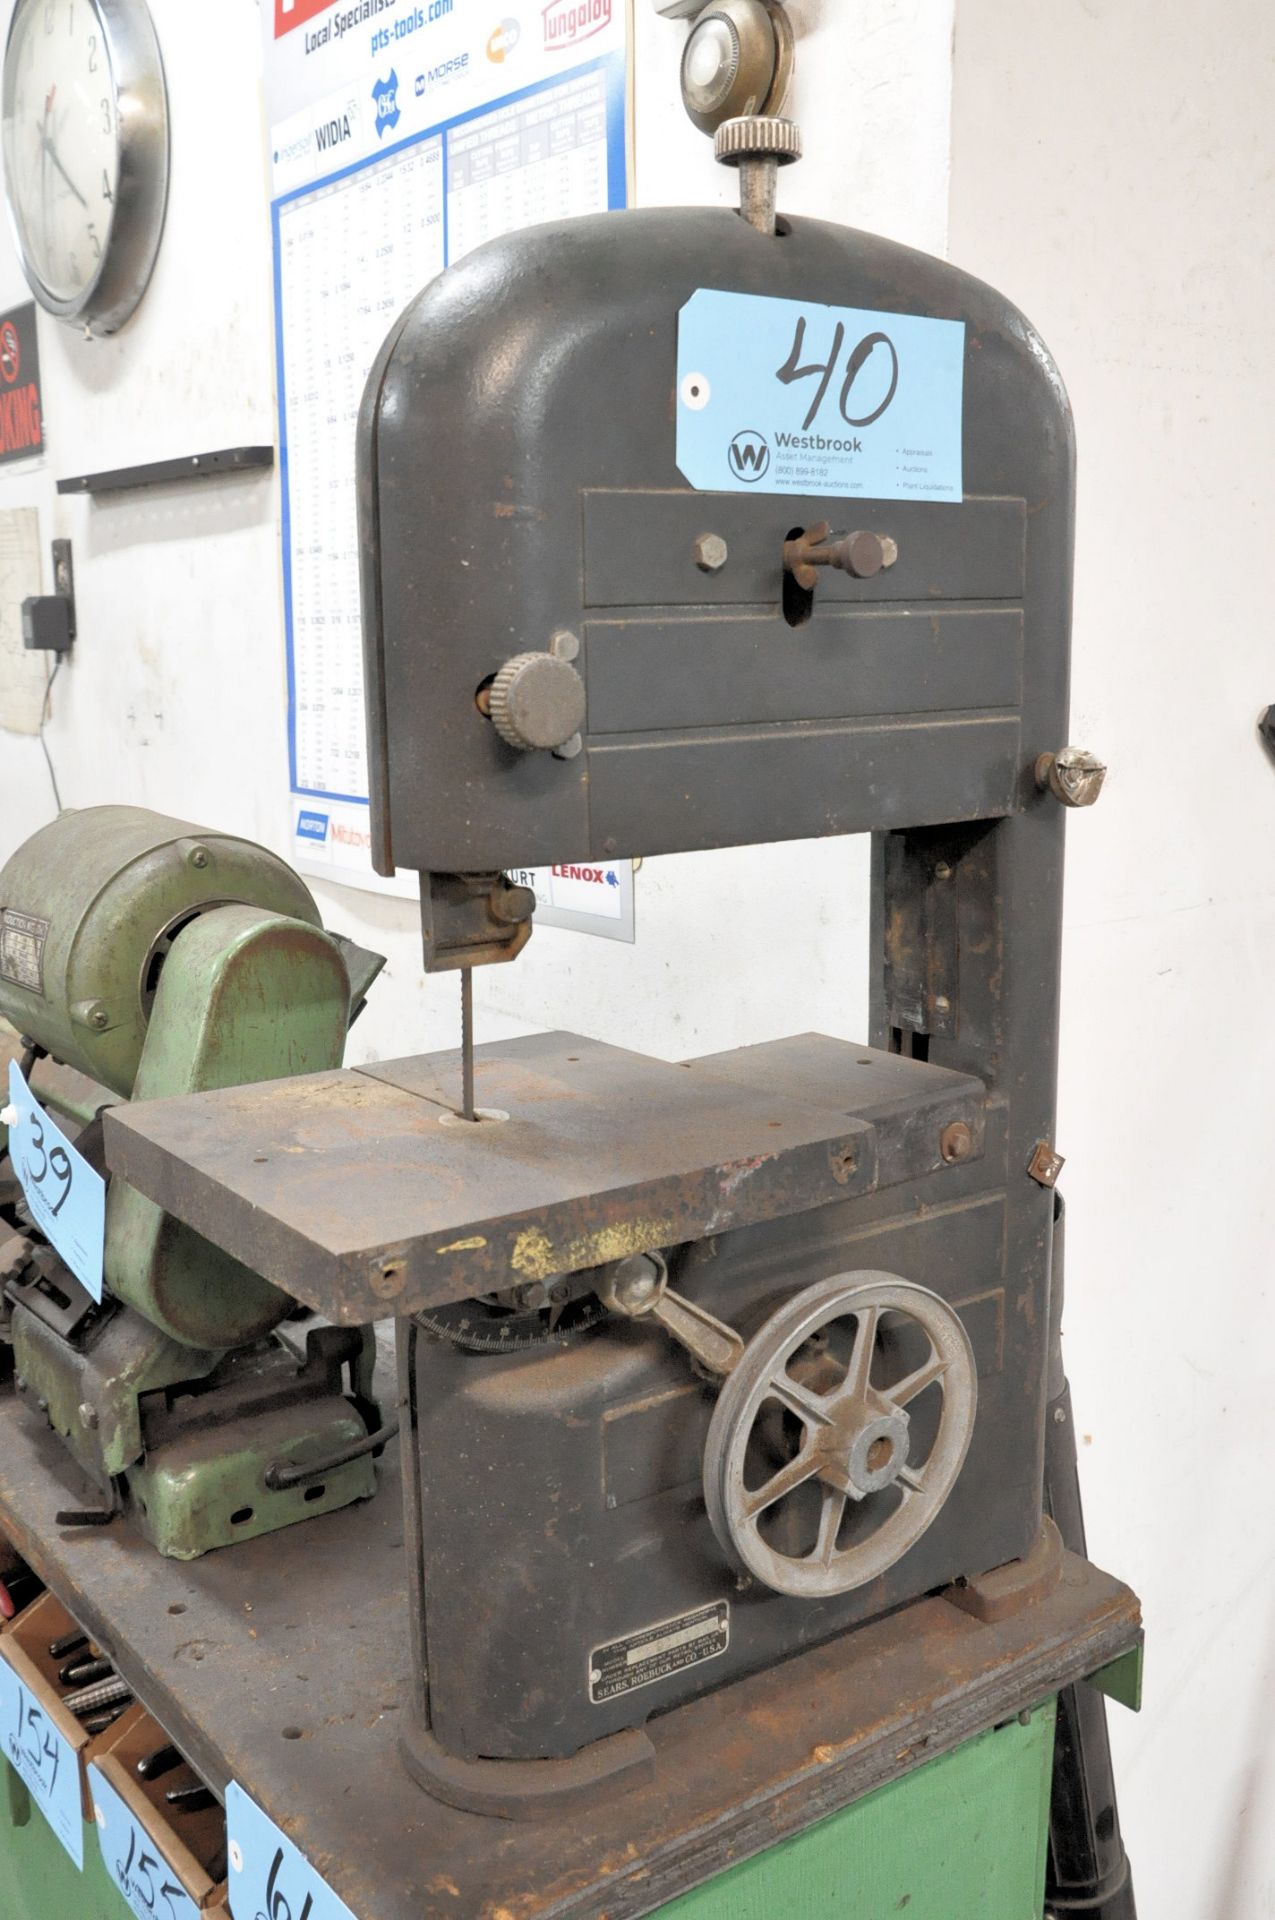 Sears Model 103.0101, 10" Bench Top Vertical Contour Wood Cutting Band Saw, 1-PH